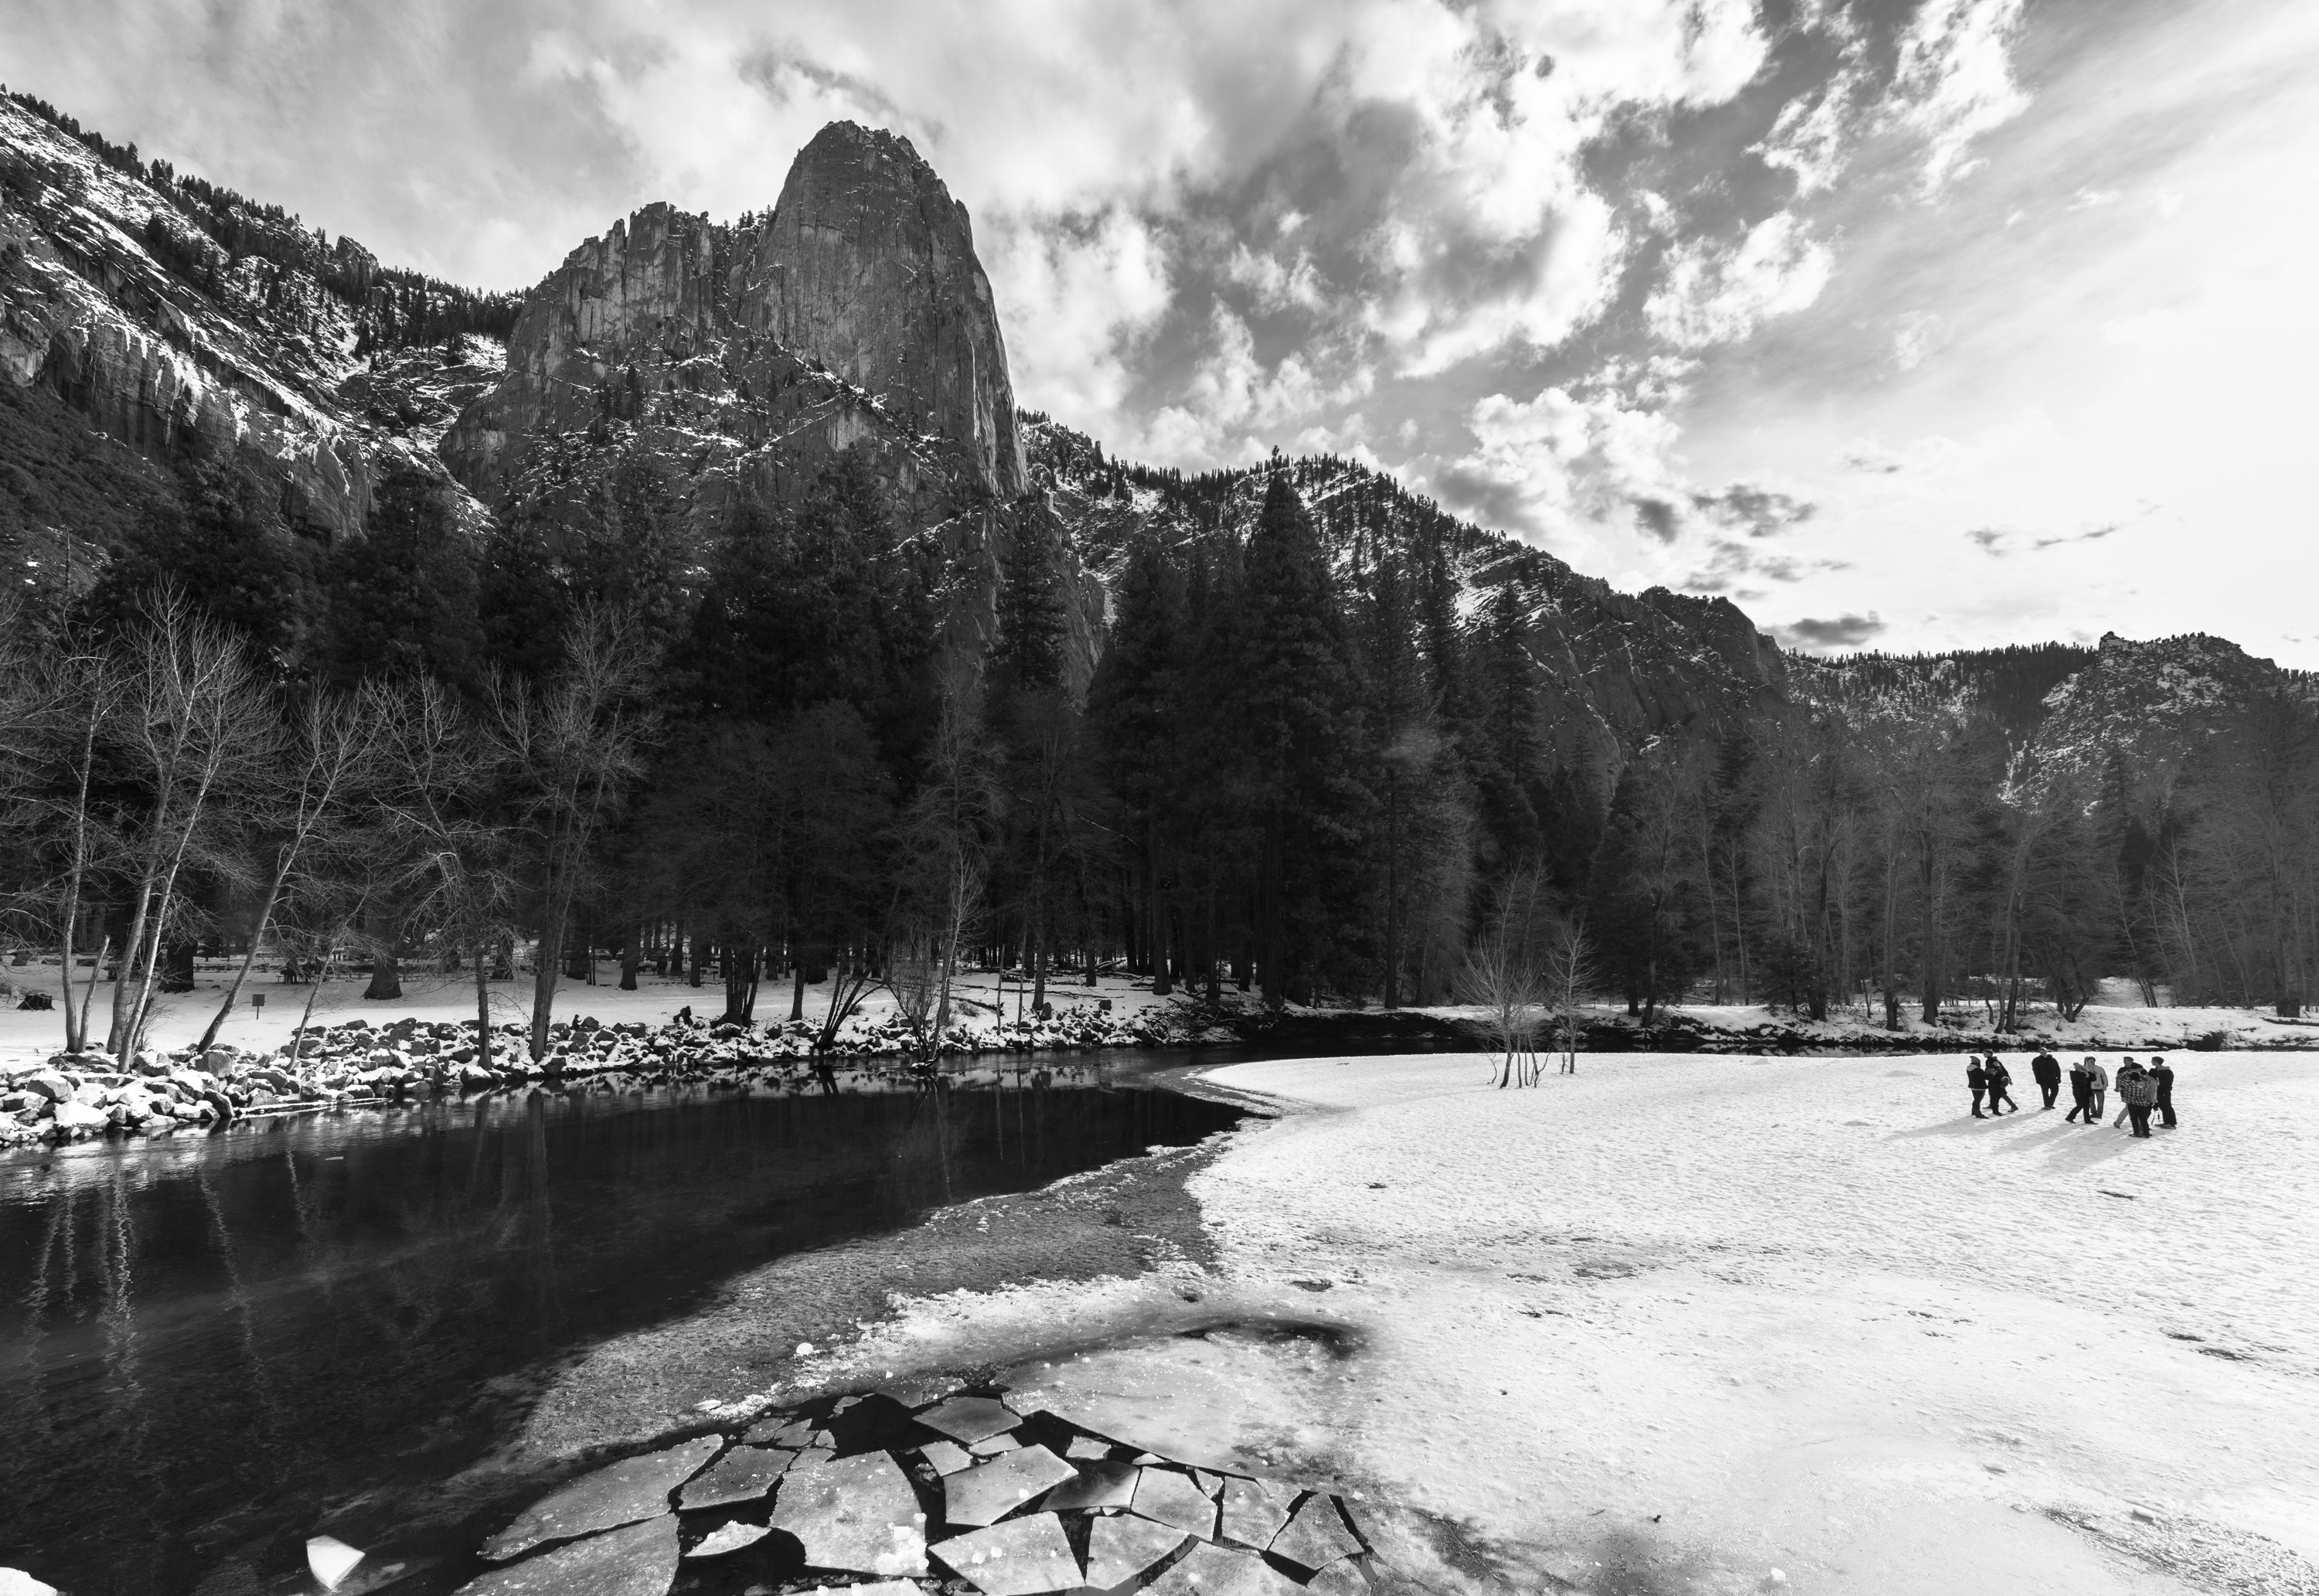 Yosemite looks better in black and white than it does in reality.